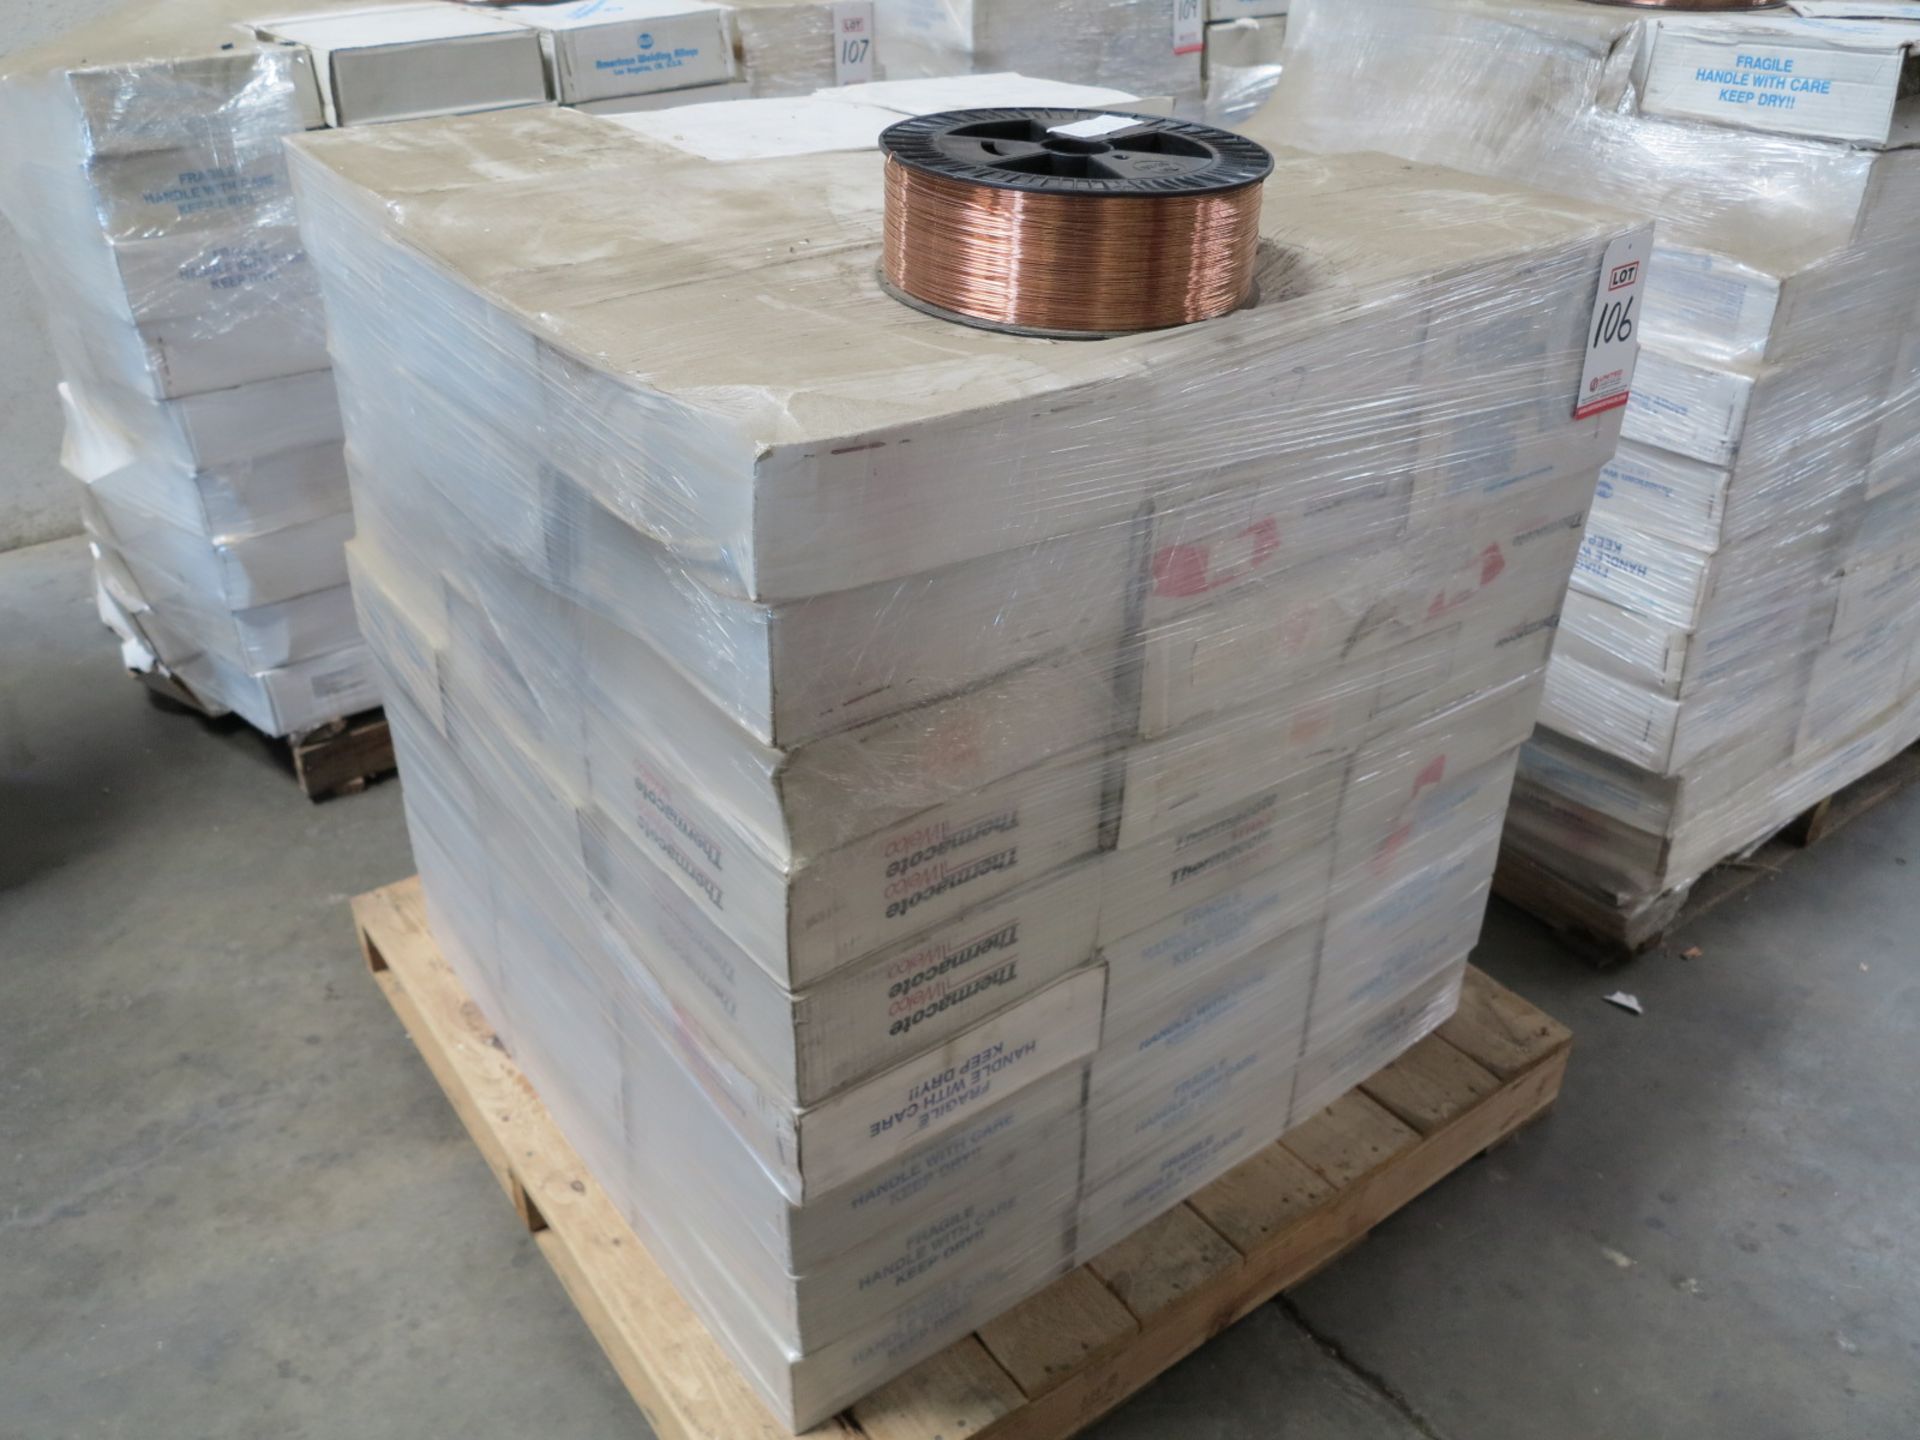 LOT - PALLET OF AMERICAN WELDING WIRE, S6, DIA. .035", 81 BOXES